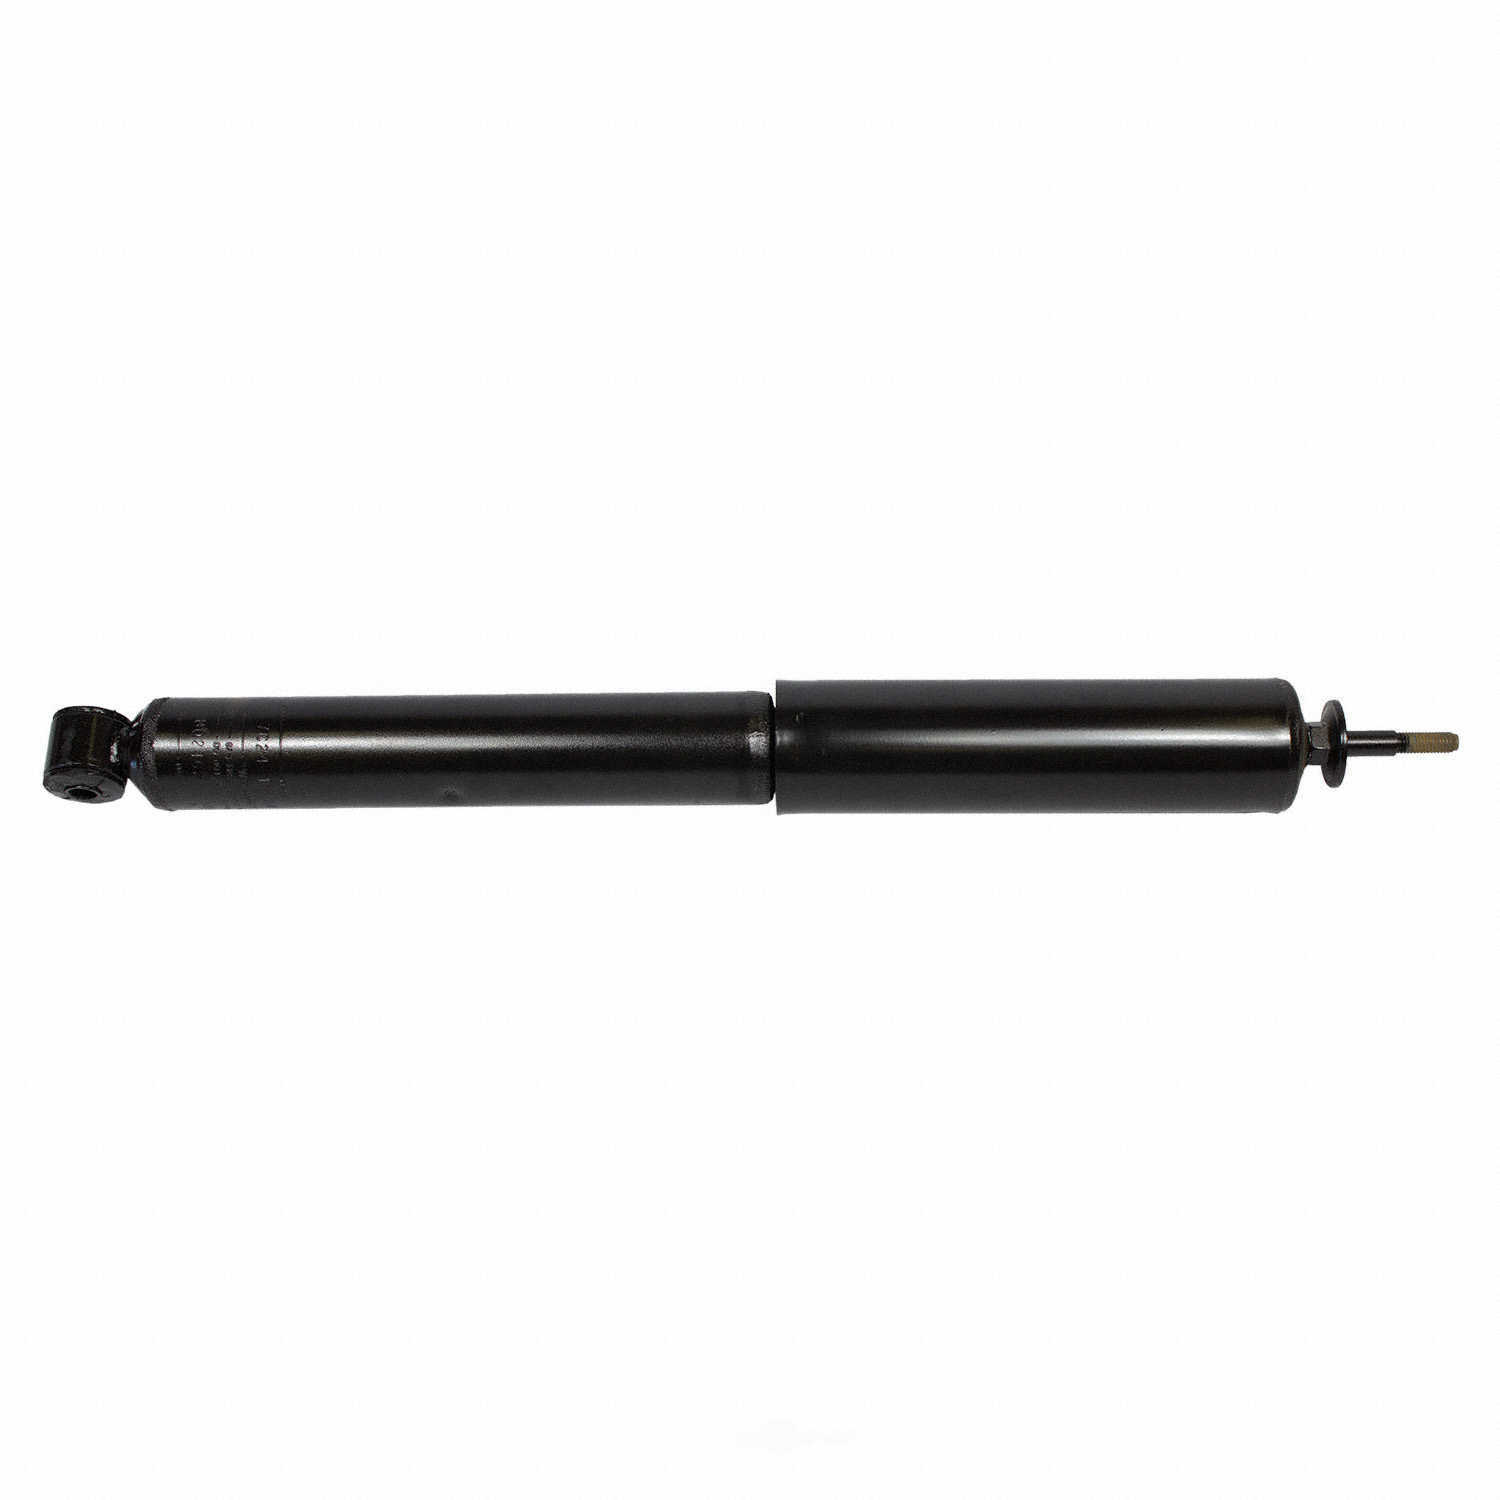 MOTORCRAFT - Shock ABSorber - New (With ABS Brakes, Rear) - MOT ASH-1090